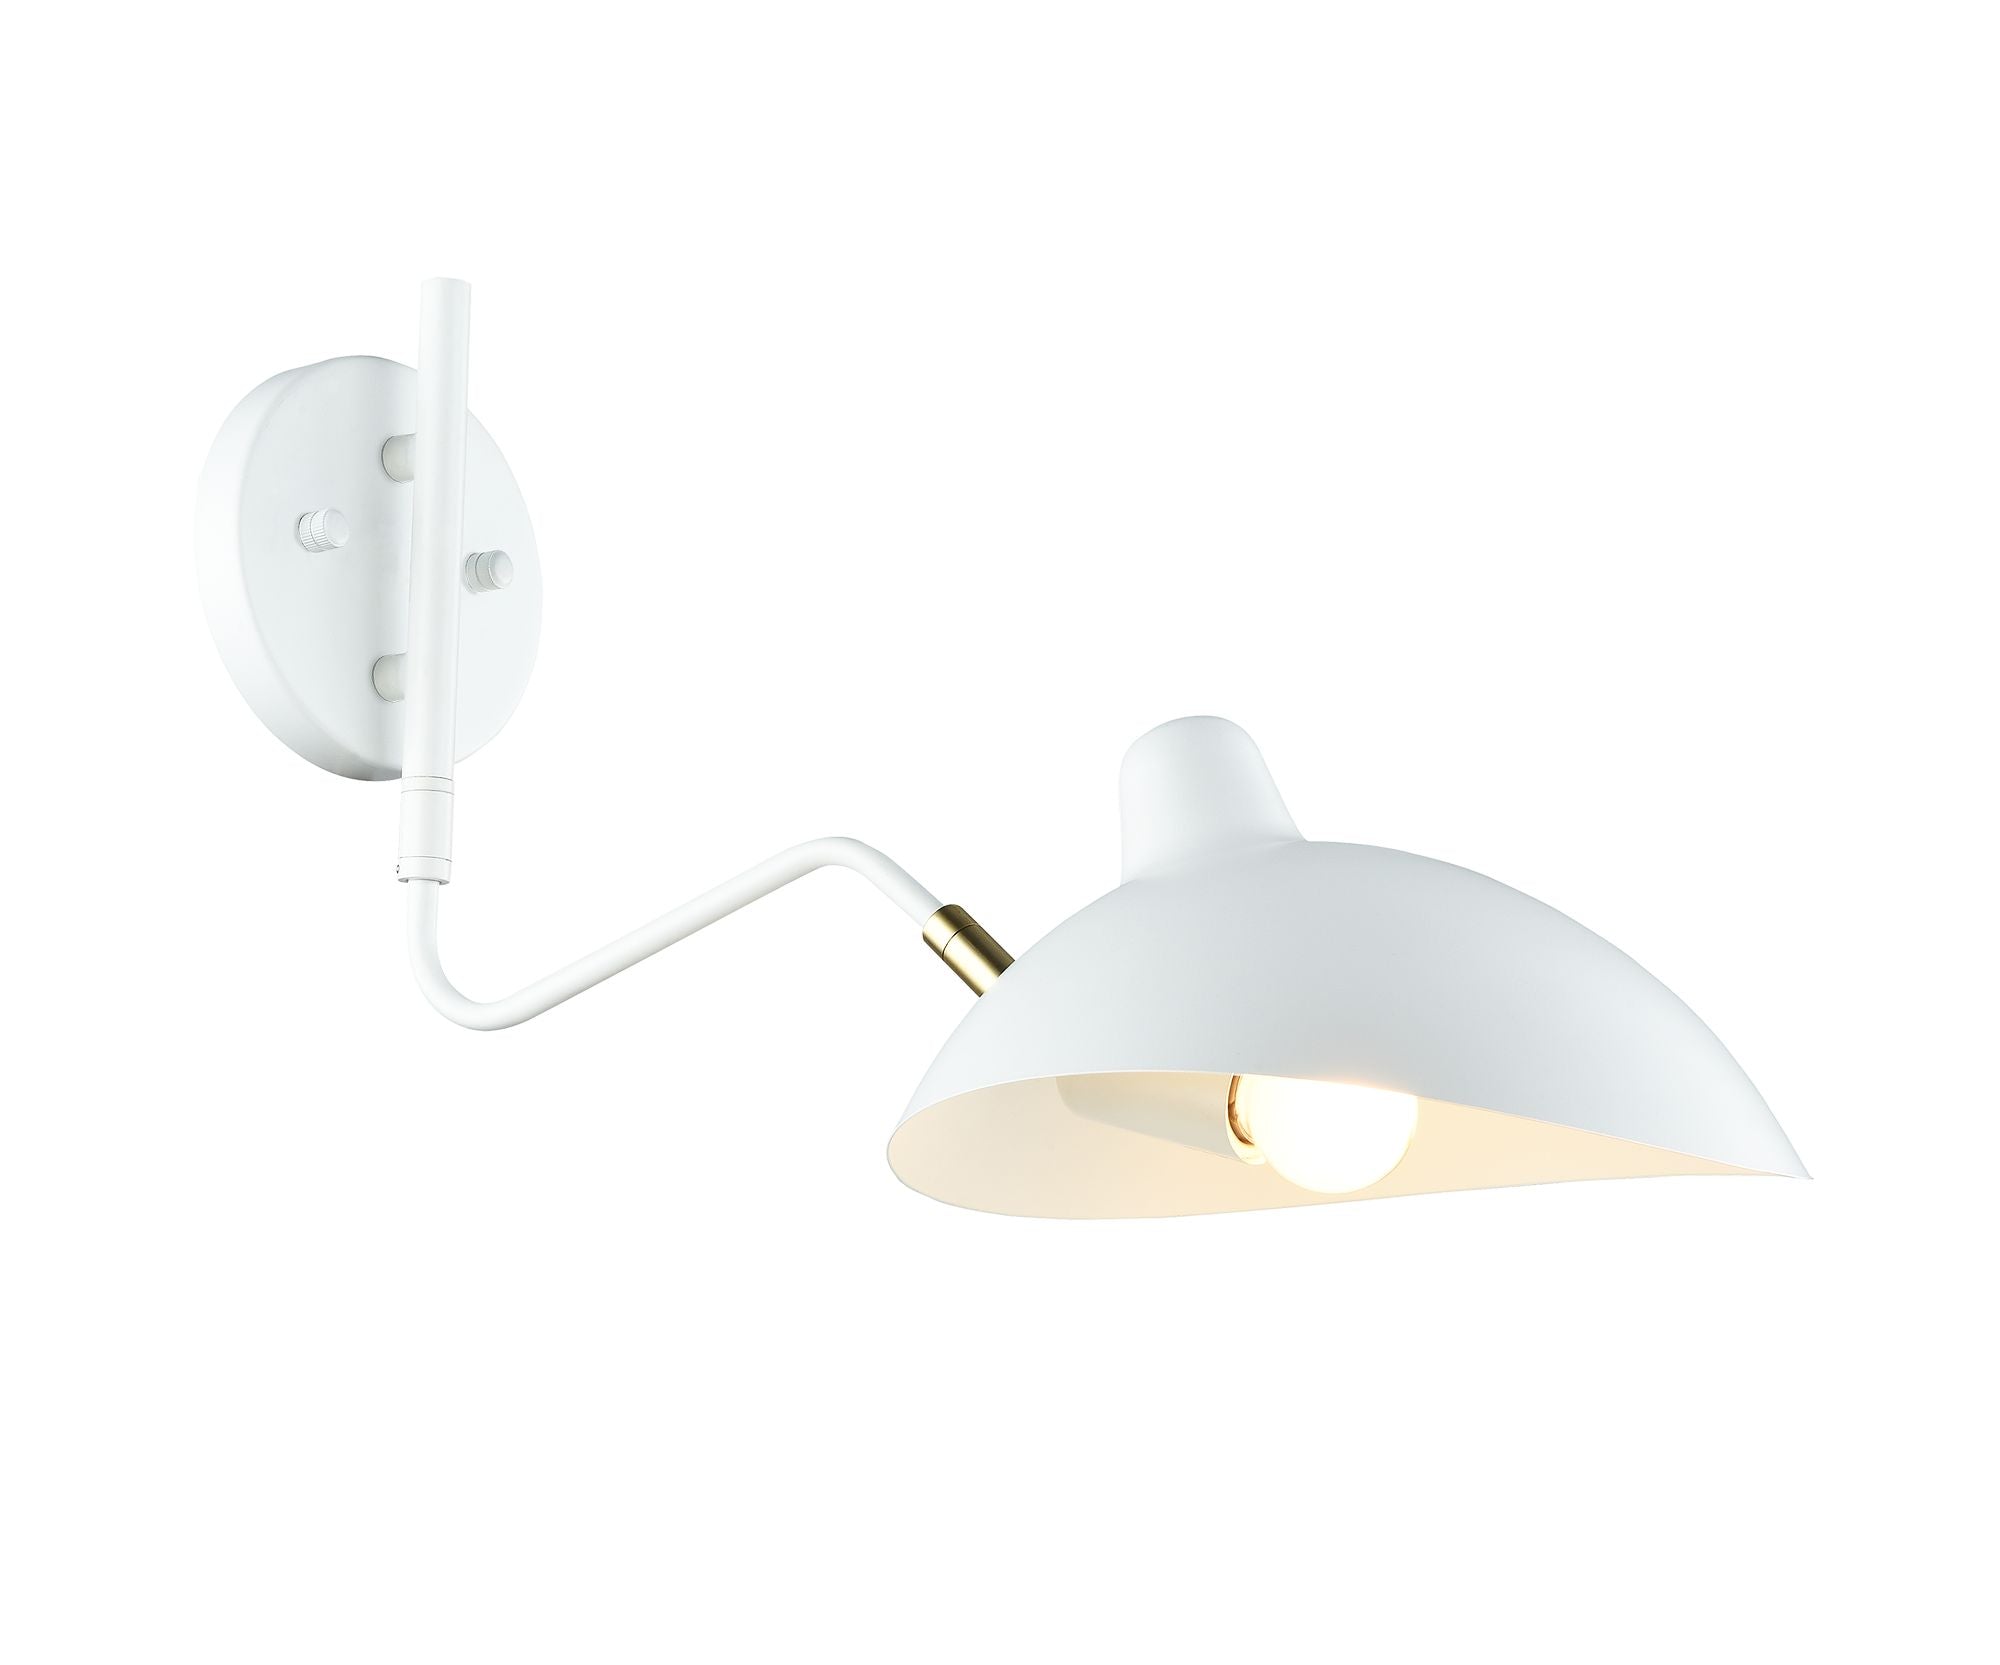 DROID Wall sconce White, Gold - W57901WH | TEO